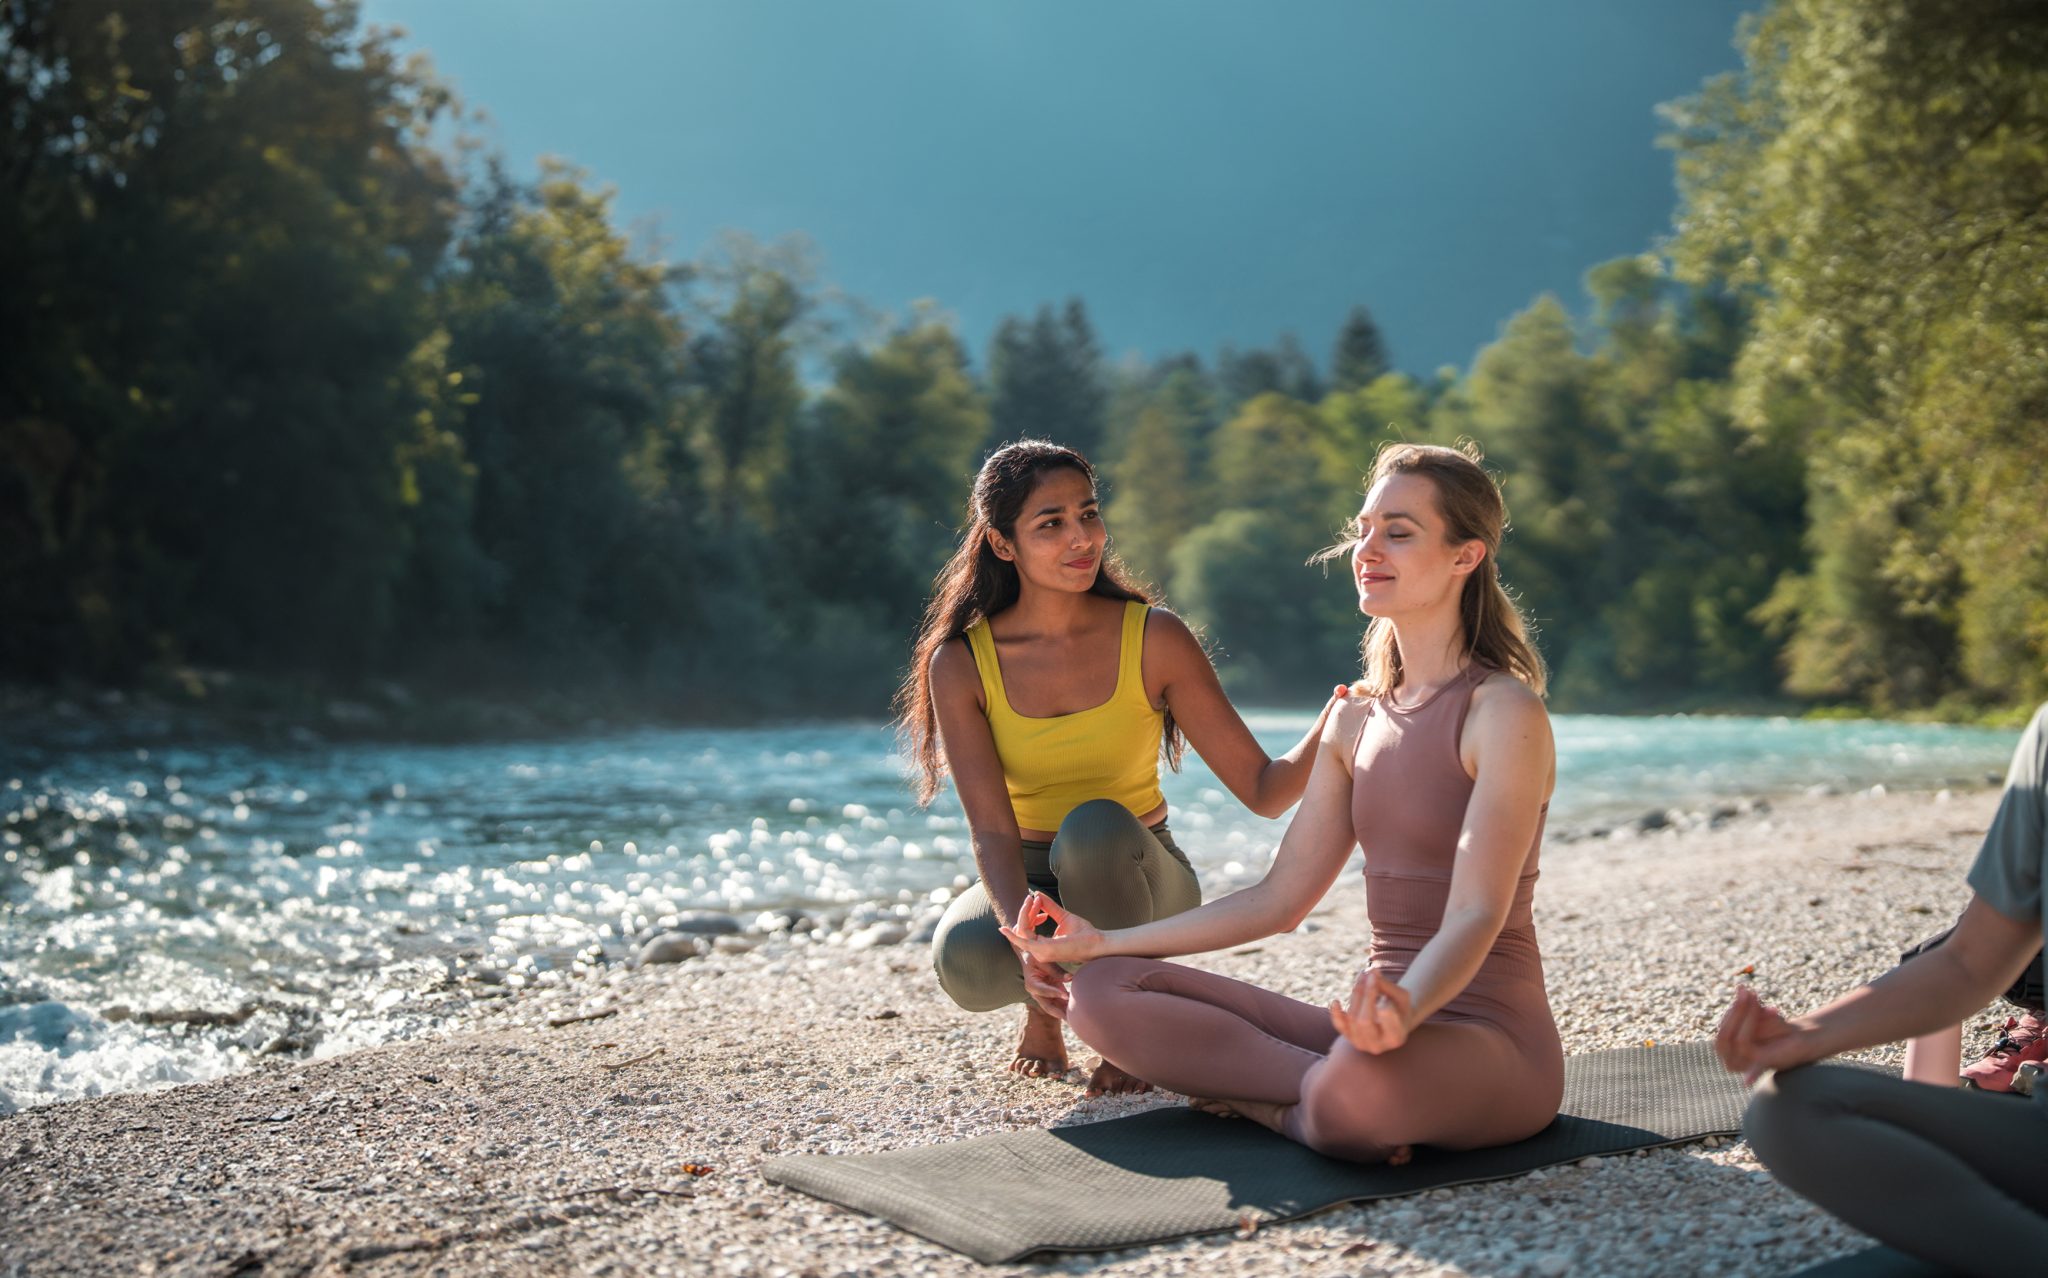 Two women practicing Ashtanga yoga on mats beside a river, surrounded by forested mountains, one in a yellow top and the other in a white bodysuit.